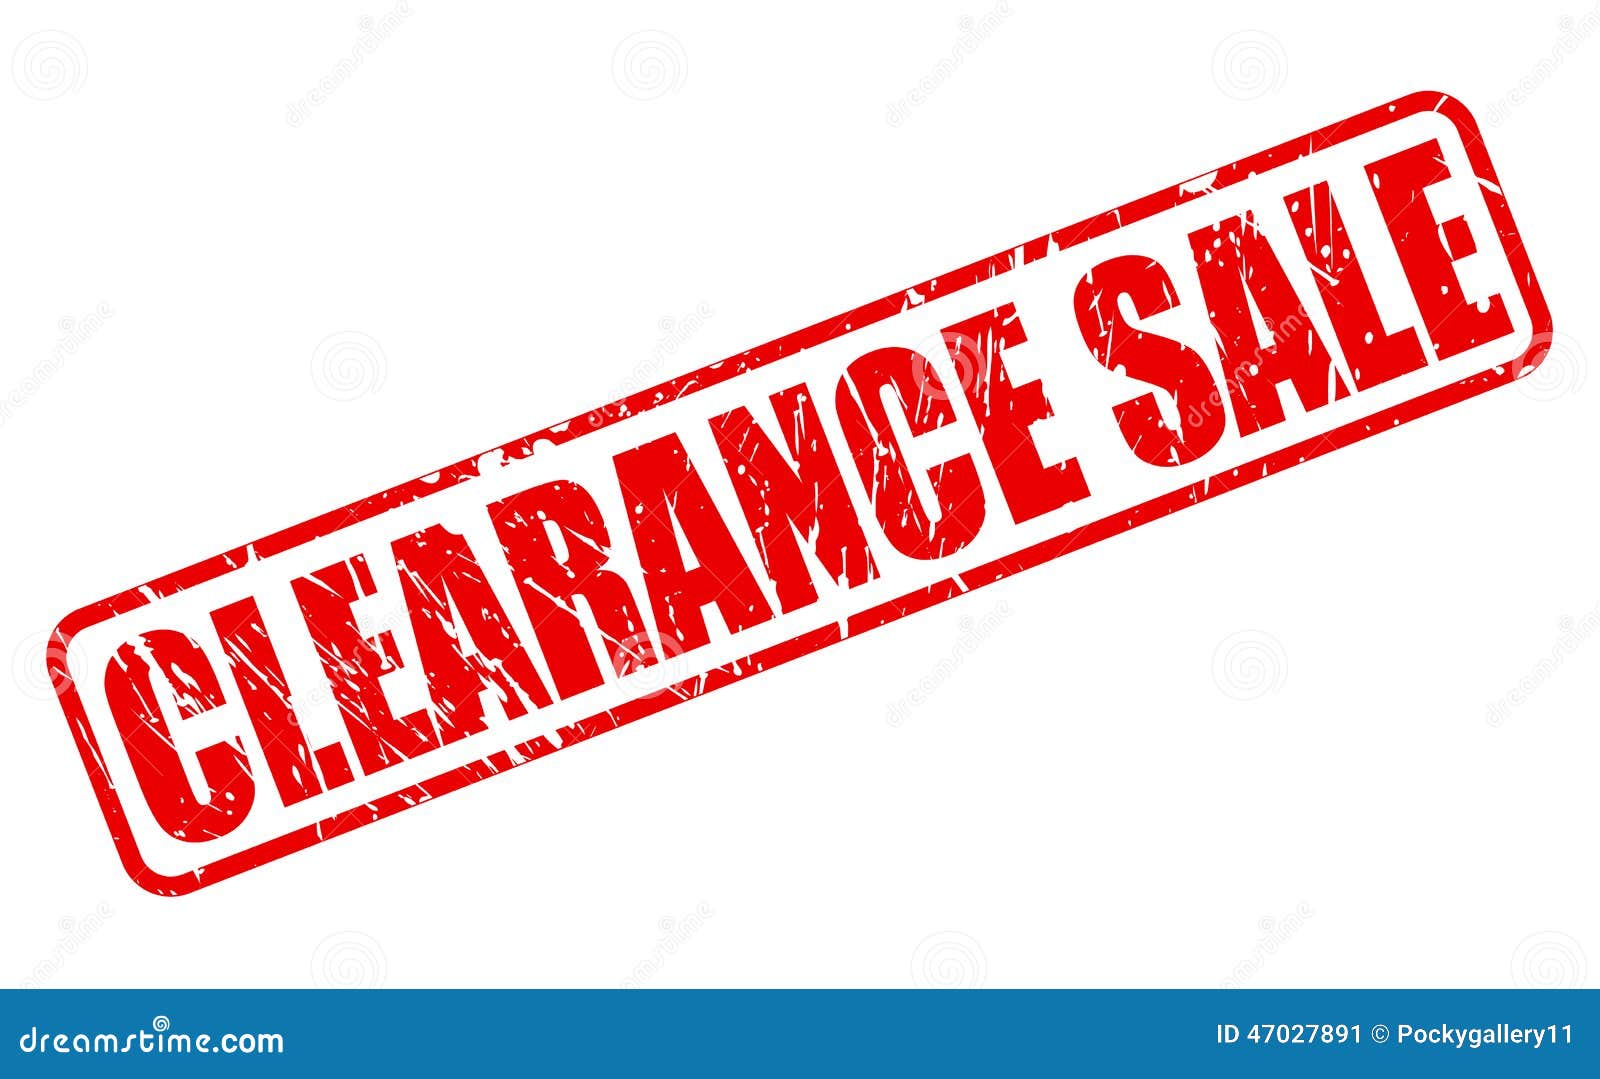 clearance sale red stamp text